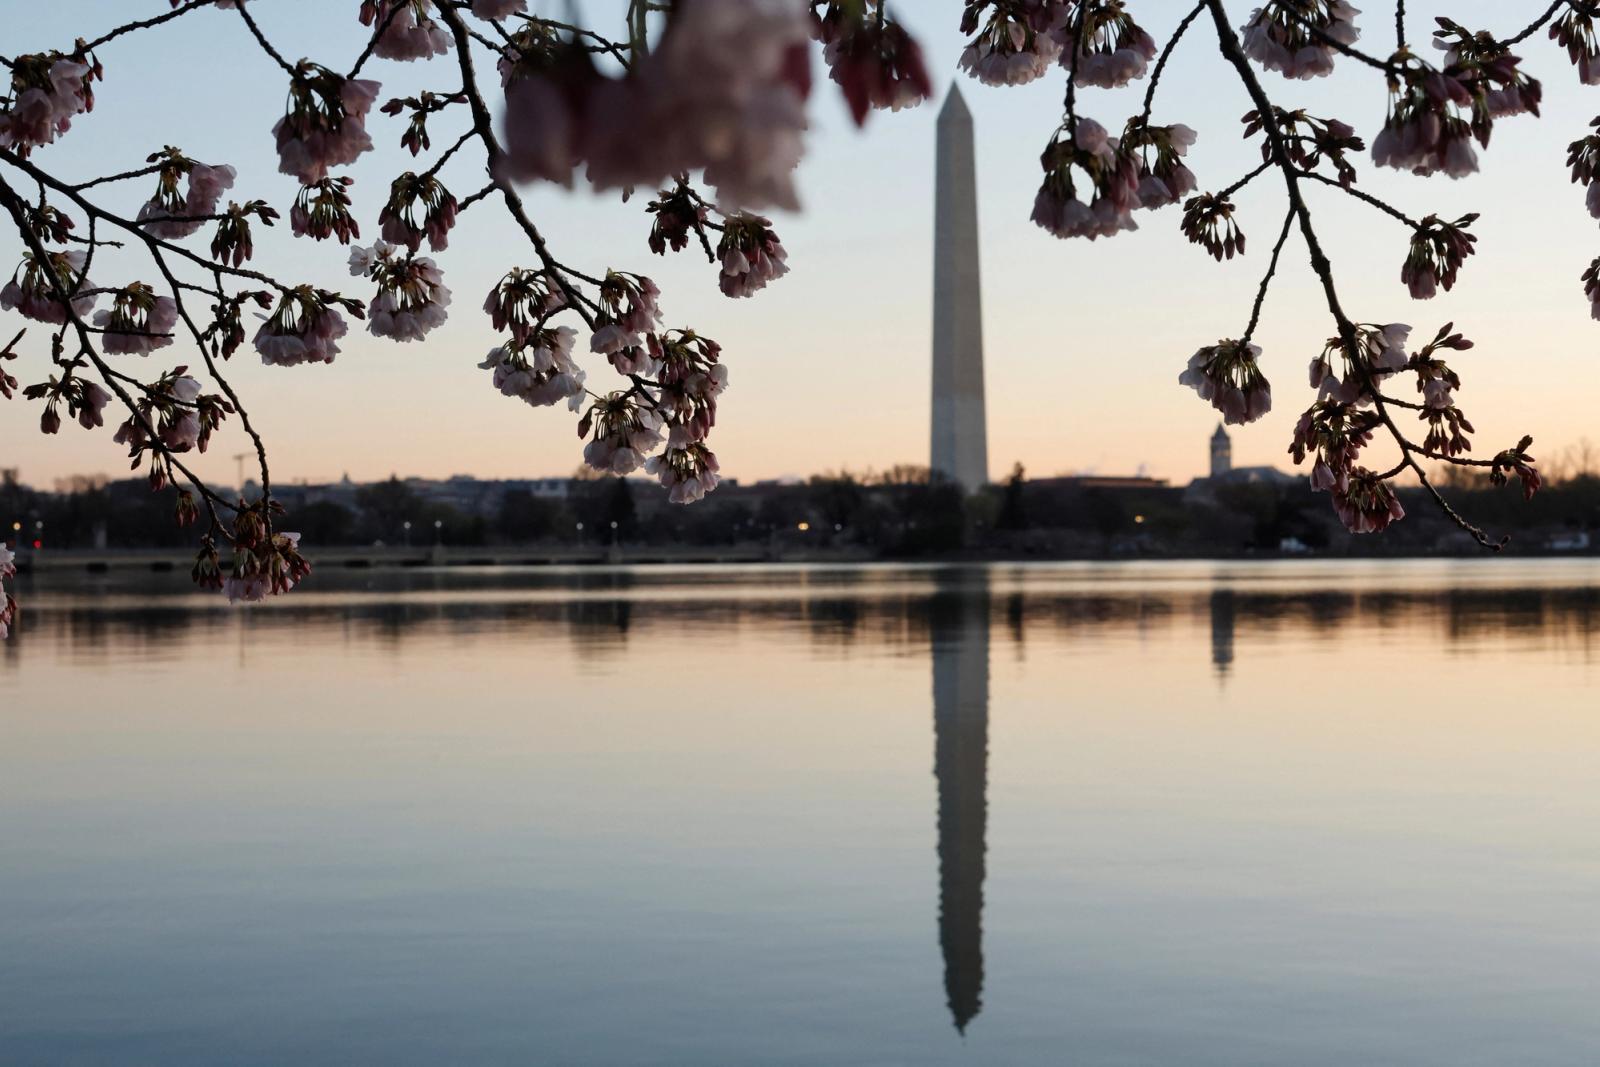 he Washington Monument is seen with cherry blossoms, which officials expect to reach their peak in the next few days, along the Tidal Basin in Washington, U.S. March 20, 2023. REUTERS/Jonathan Ernst